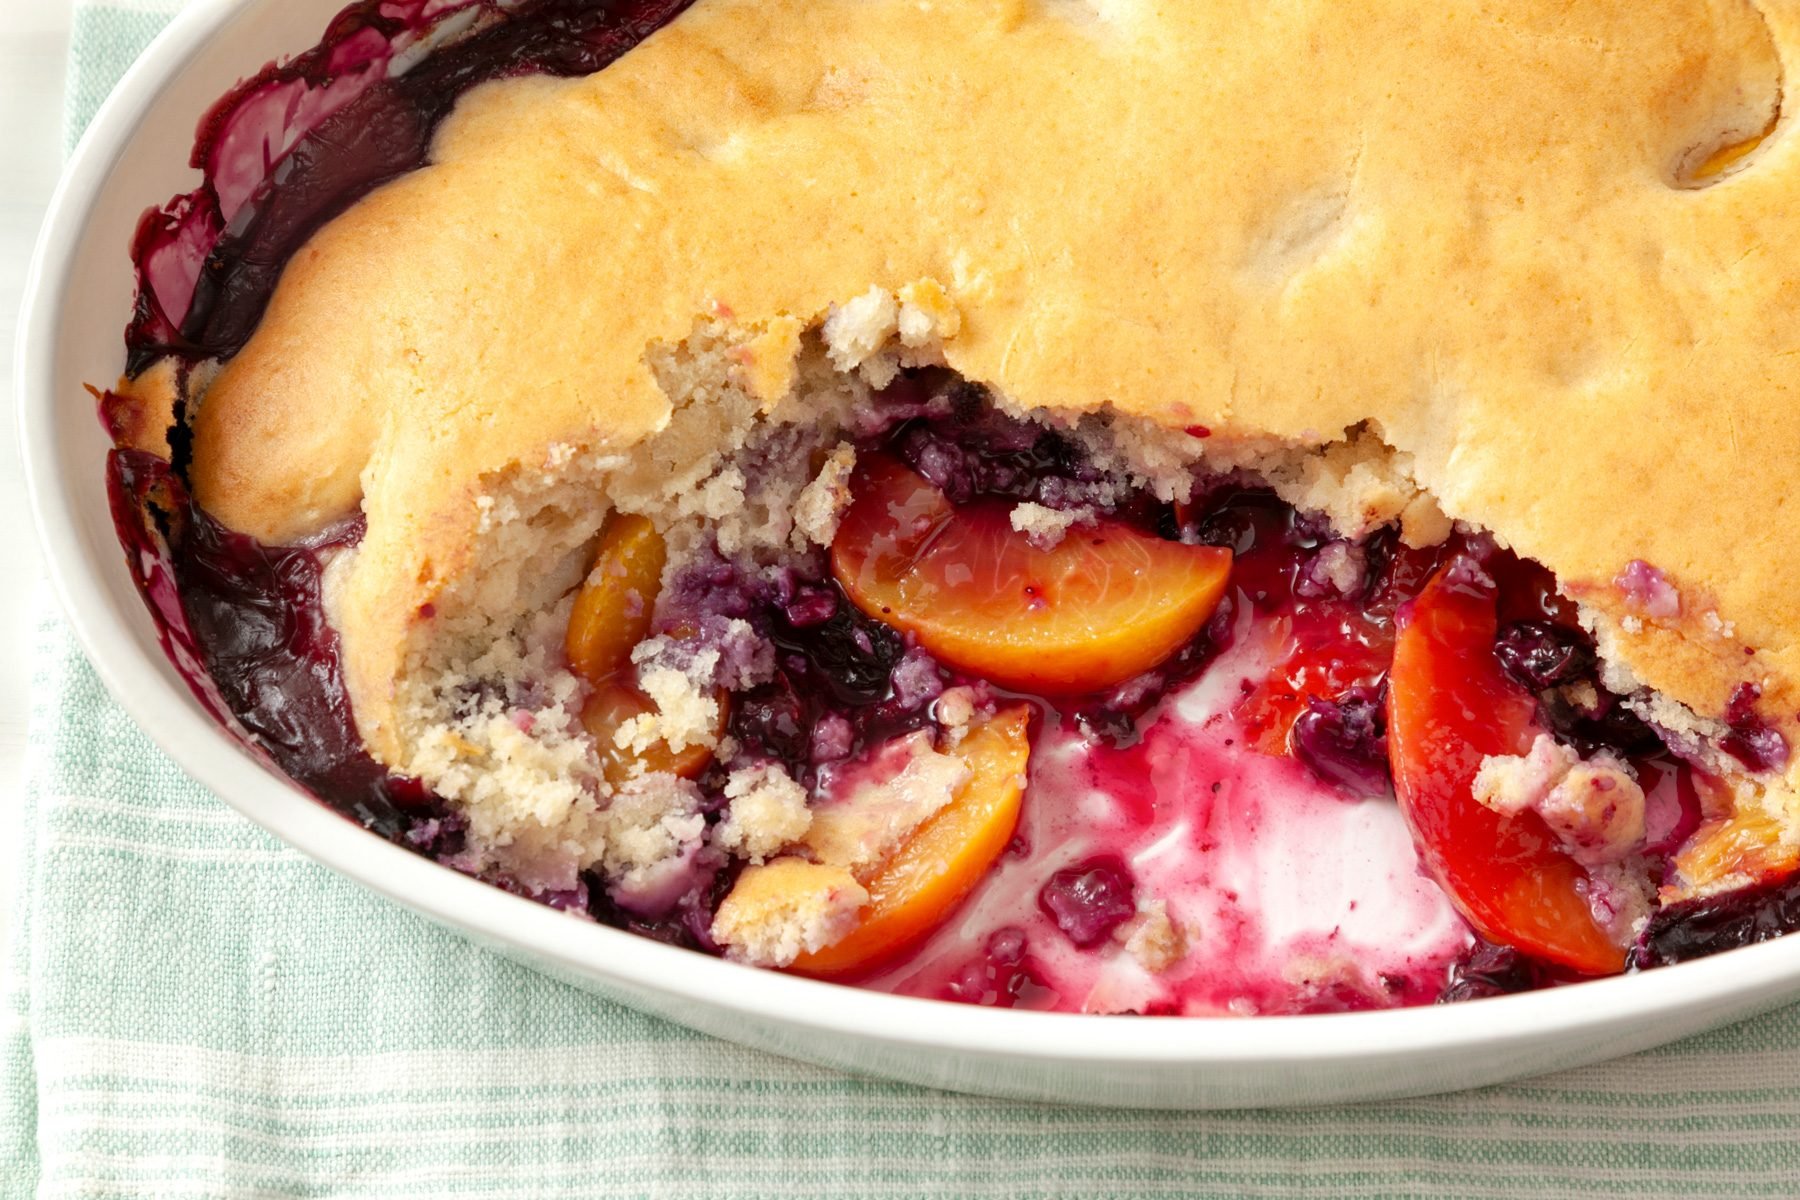 A plate of Peach Blueberry Cobbler on a table